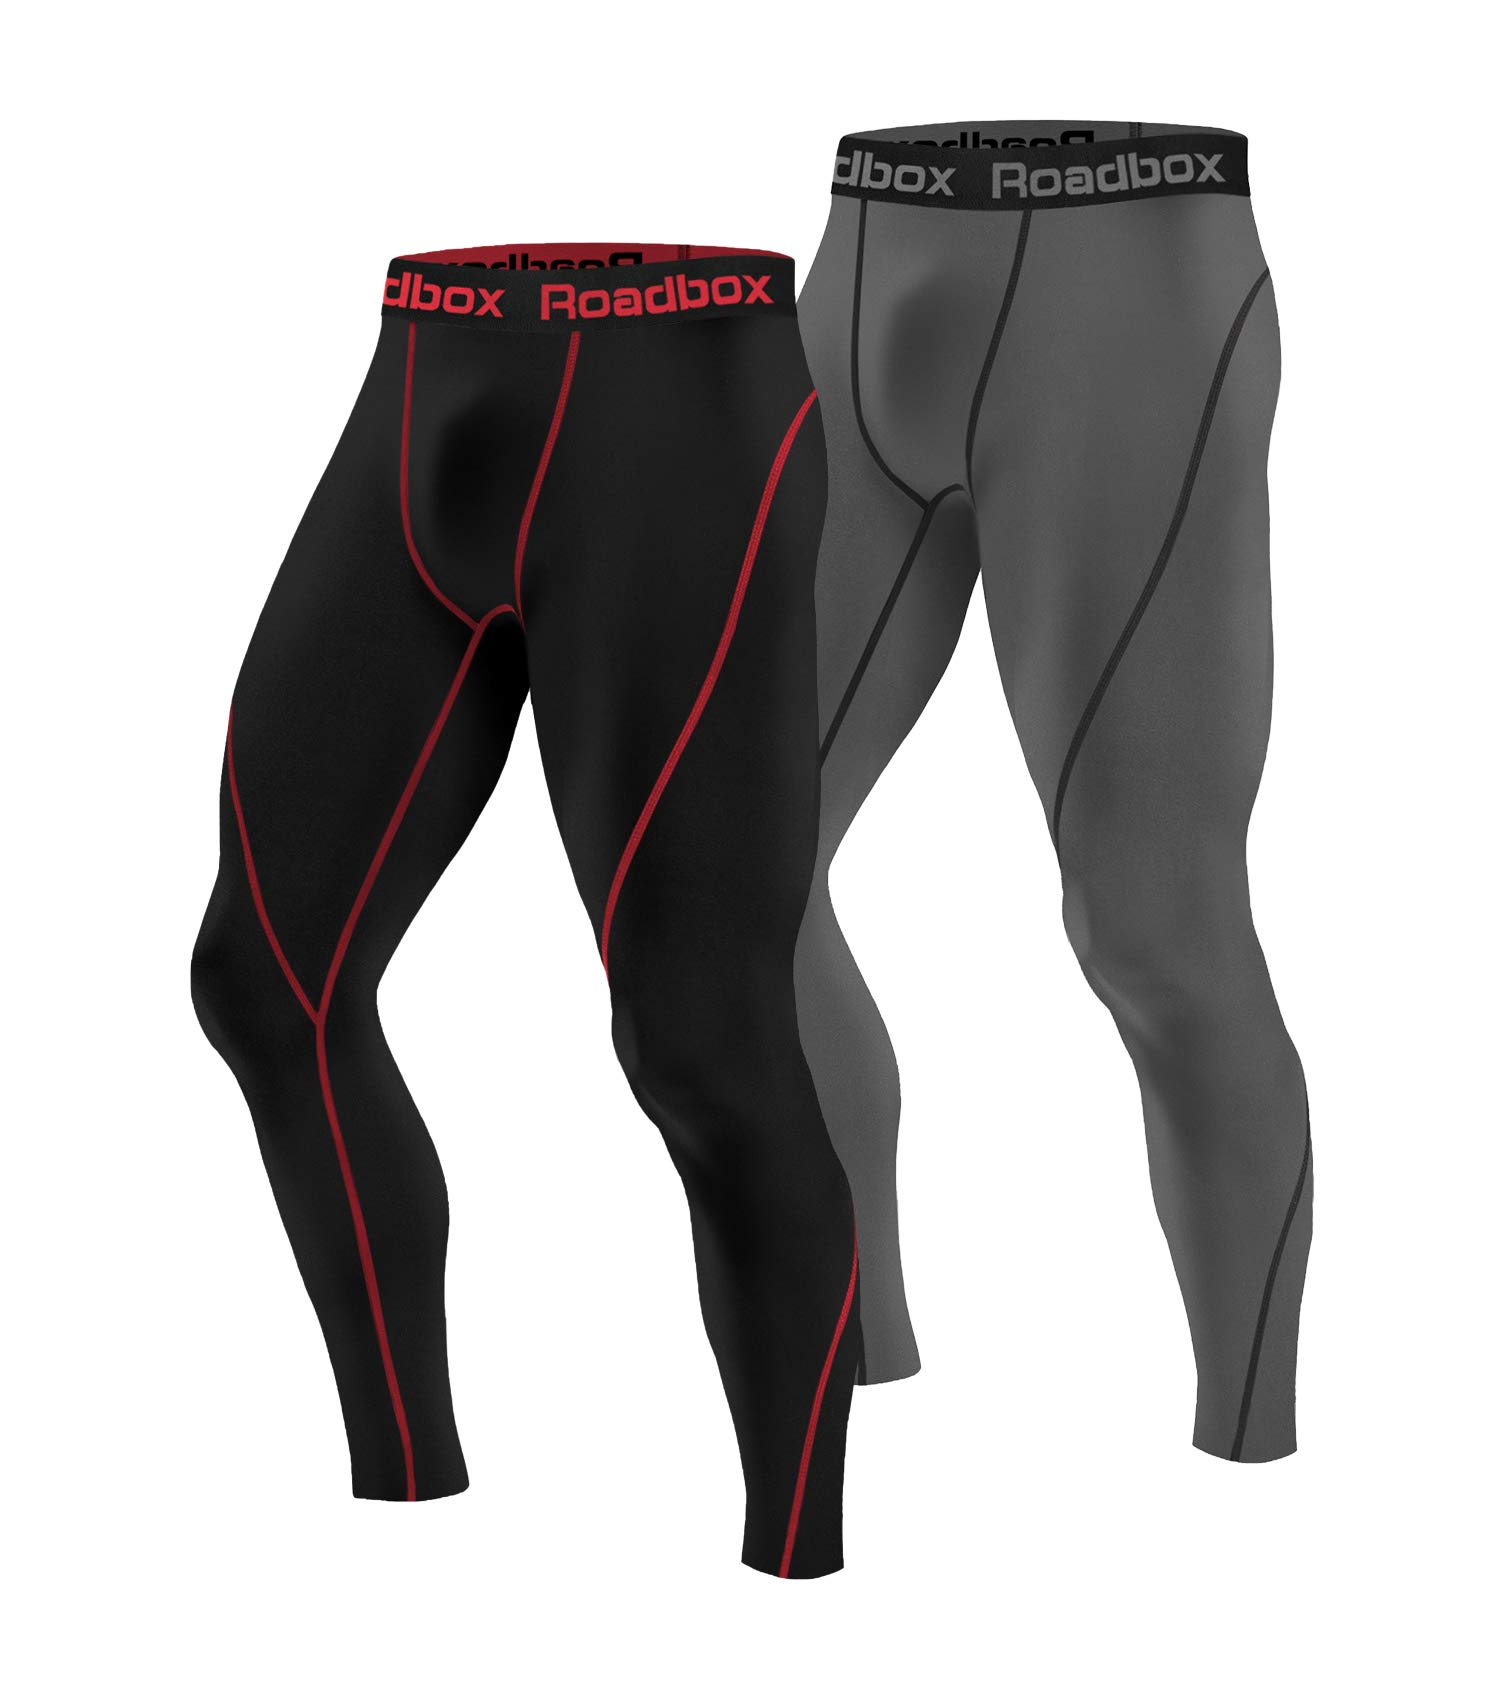 Roadbox (Size: L) 2 Pack Men’s Compression Pants Workout Warm Dry Cool Sports Leggings Tights Baselayer